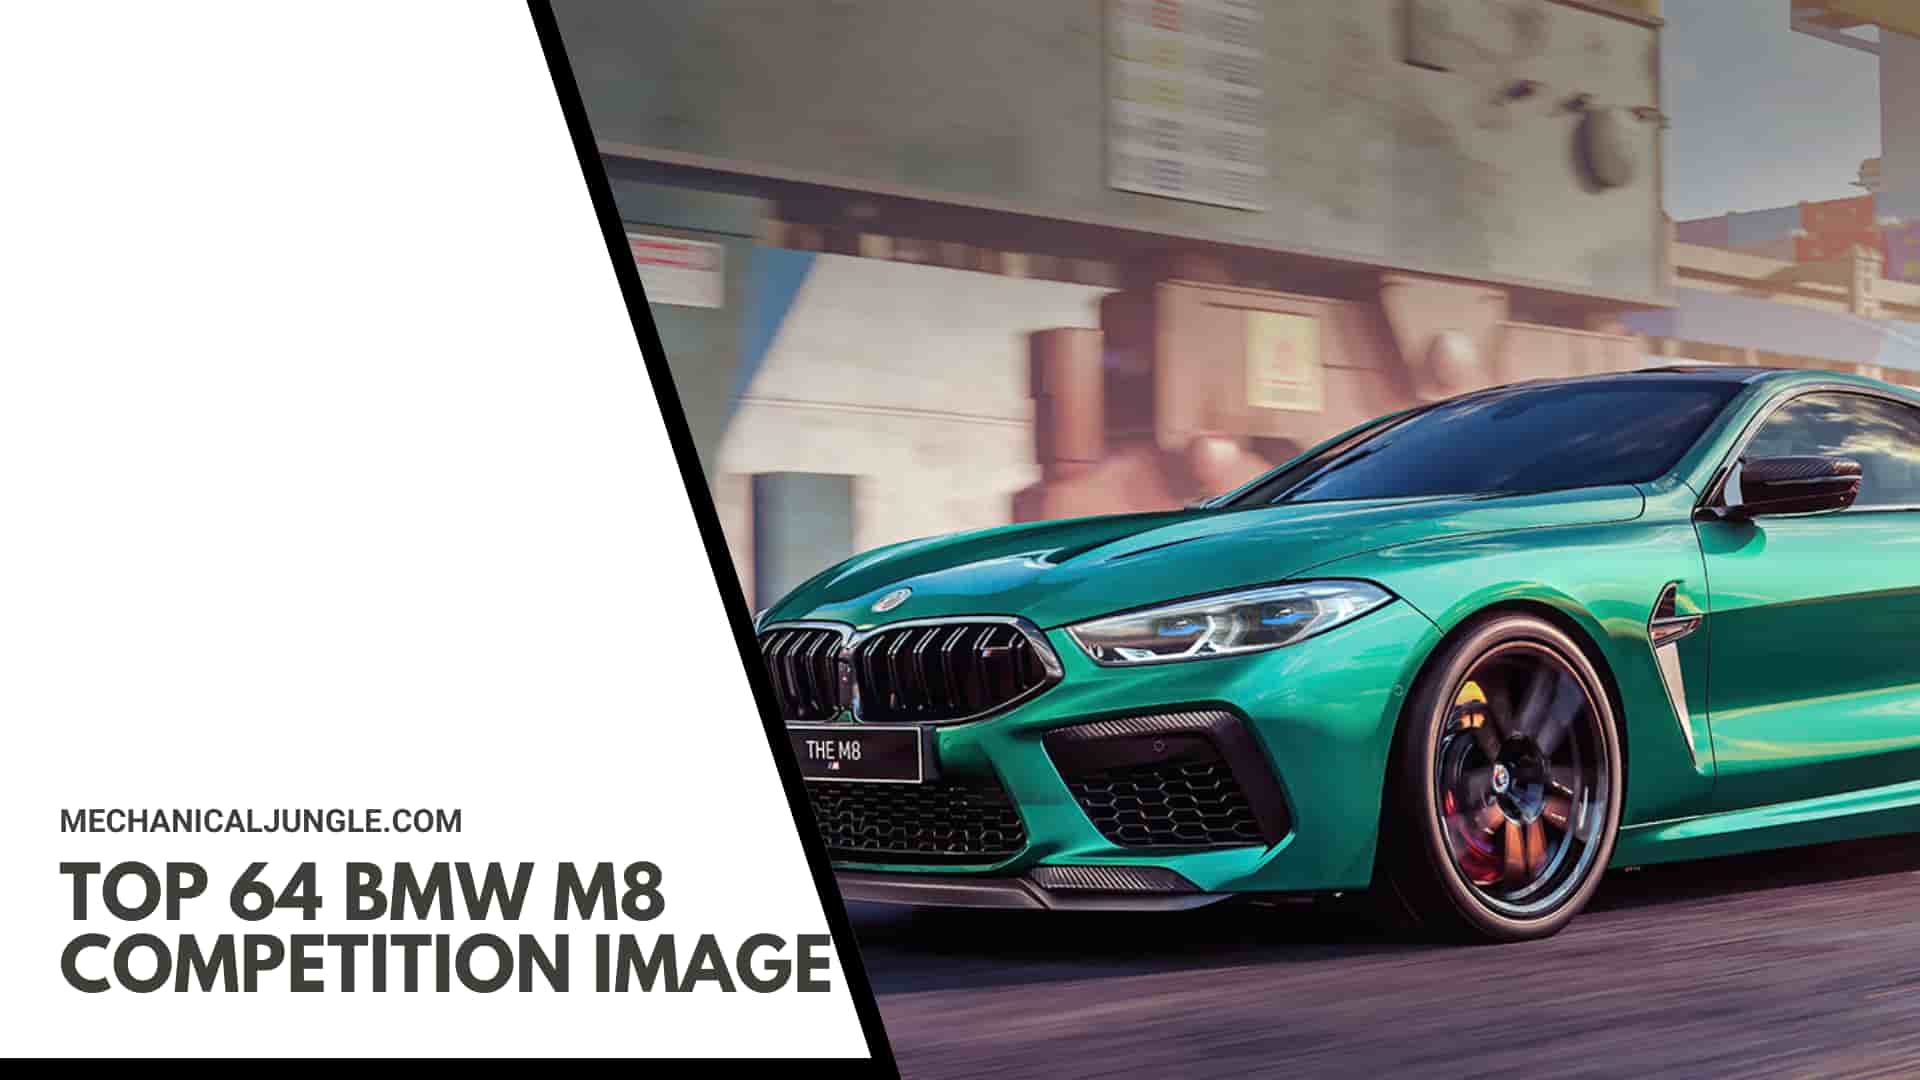 Top 64 BMW M8 Competition Image